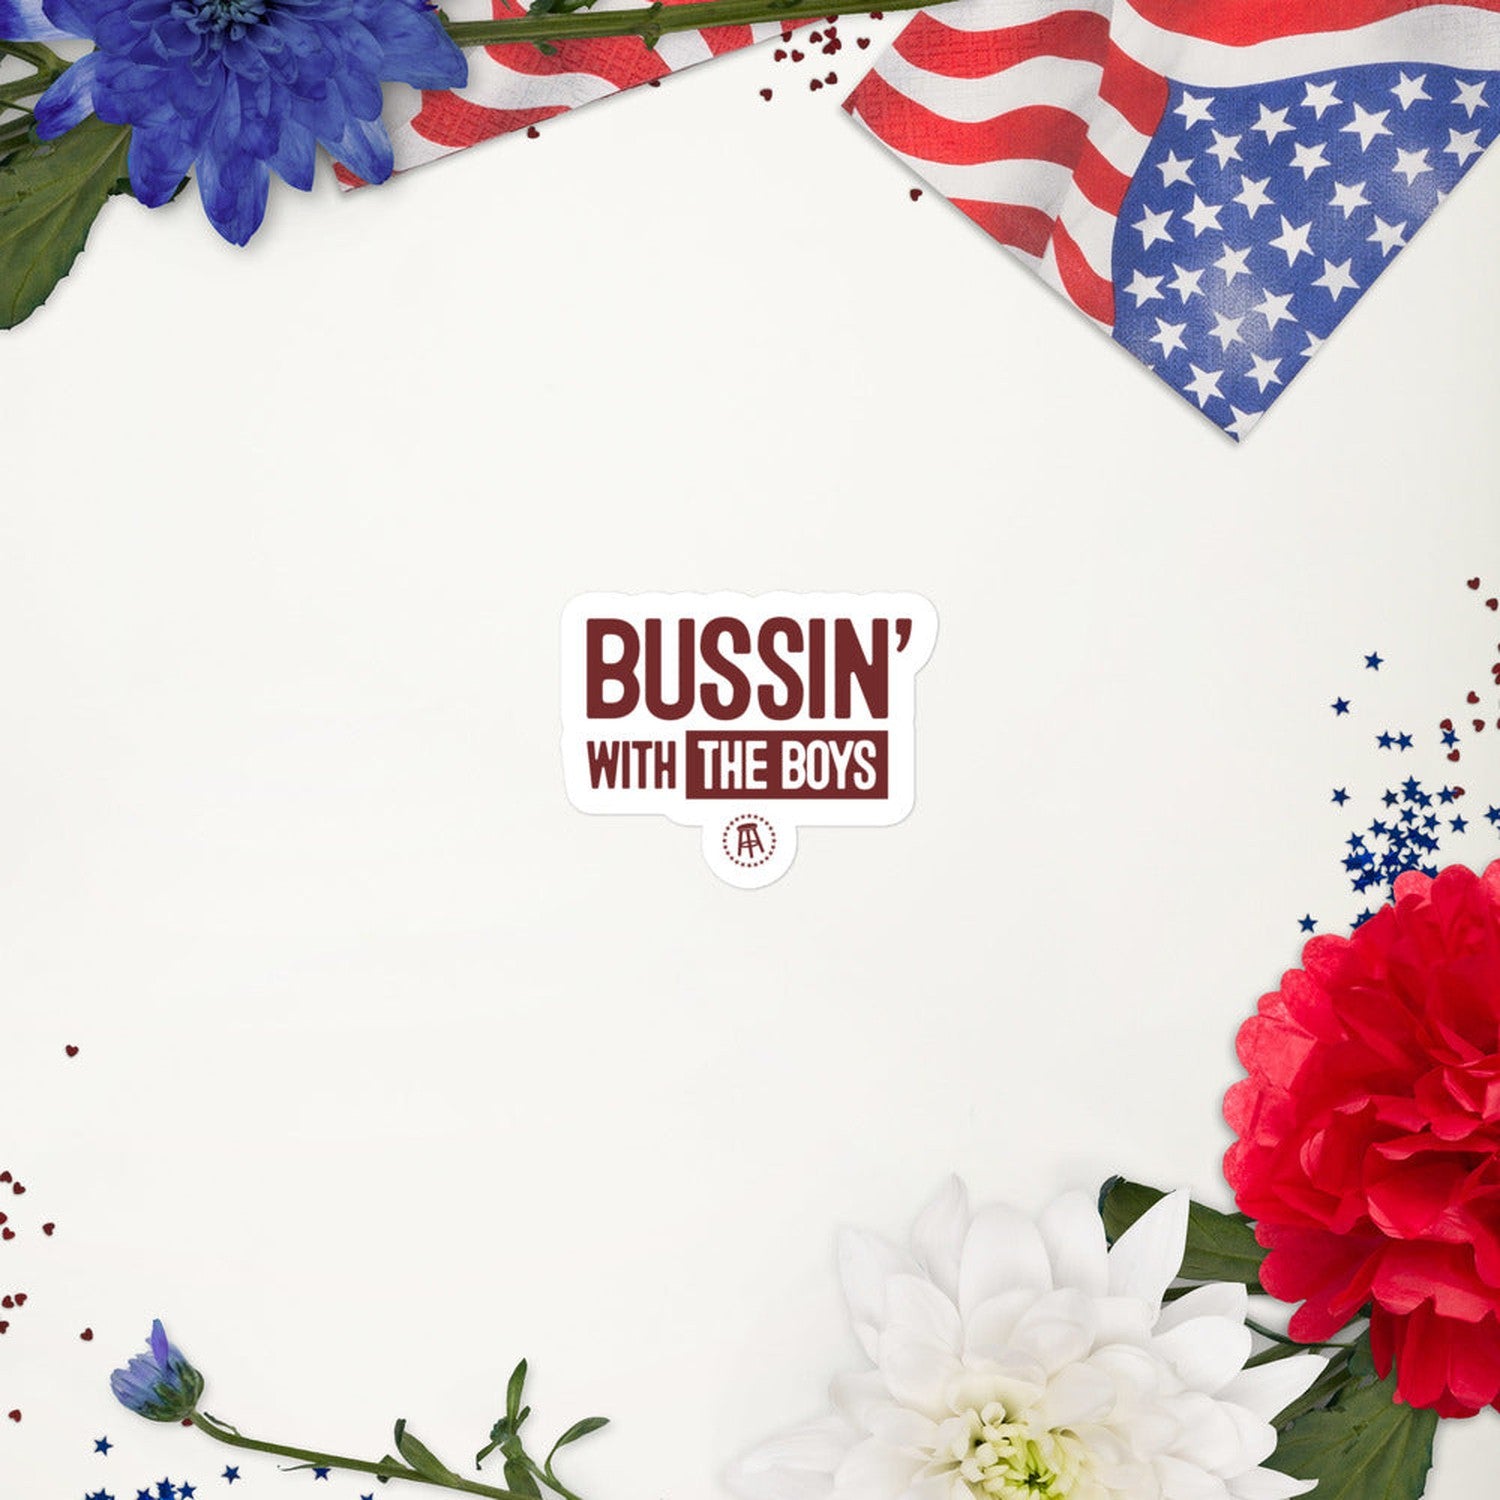 Bussin' With The Boys Sticker-Stickers-Bussin With The Boys-Barstool Sports